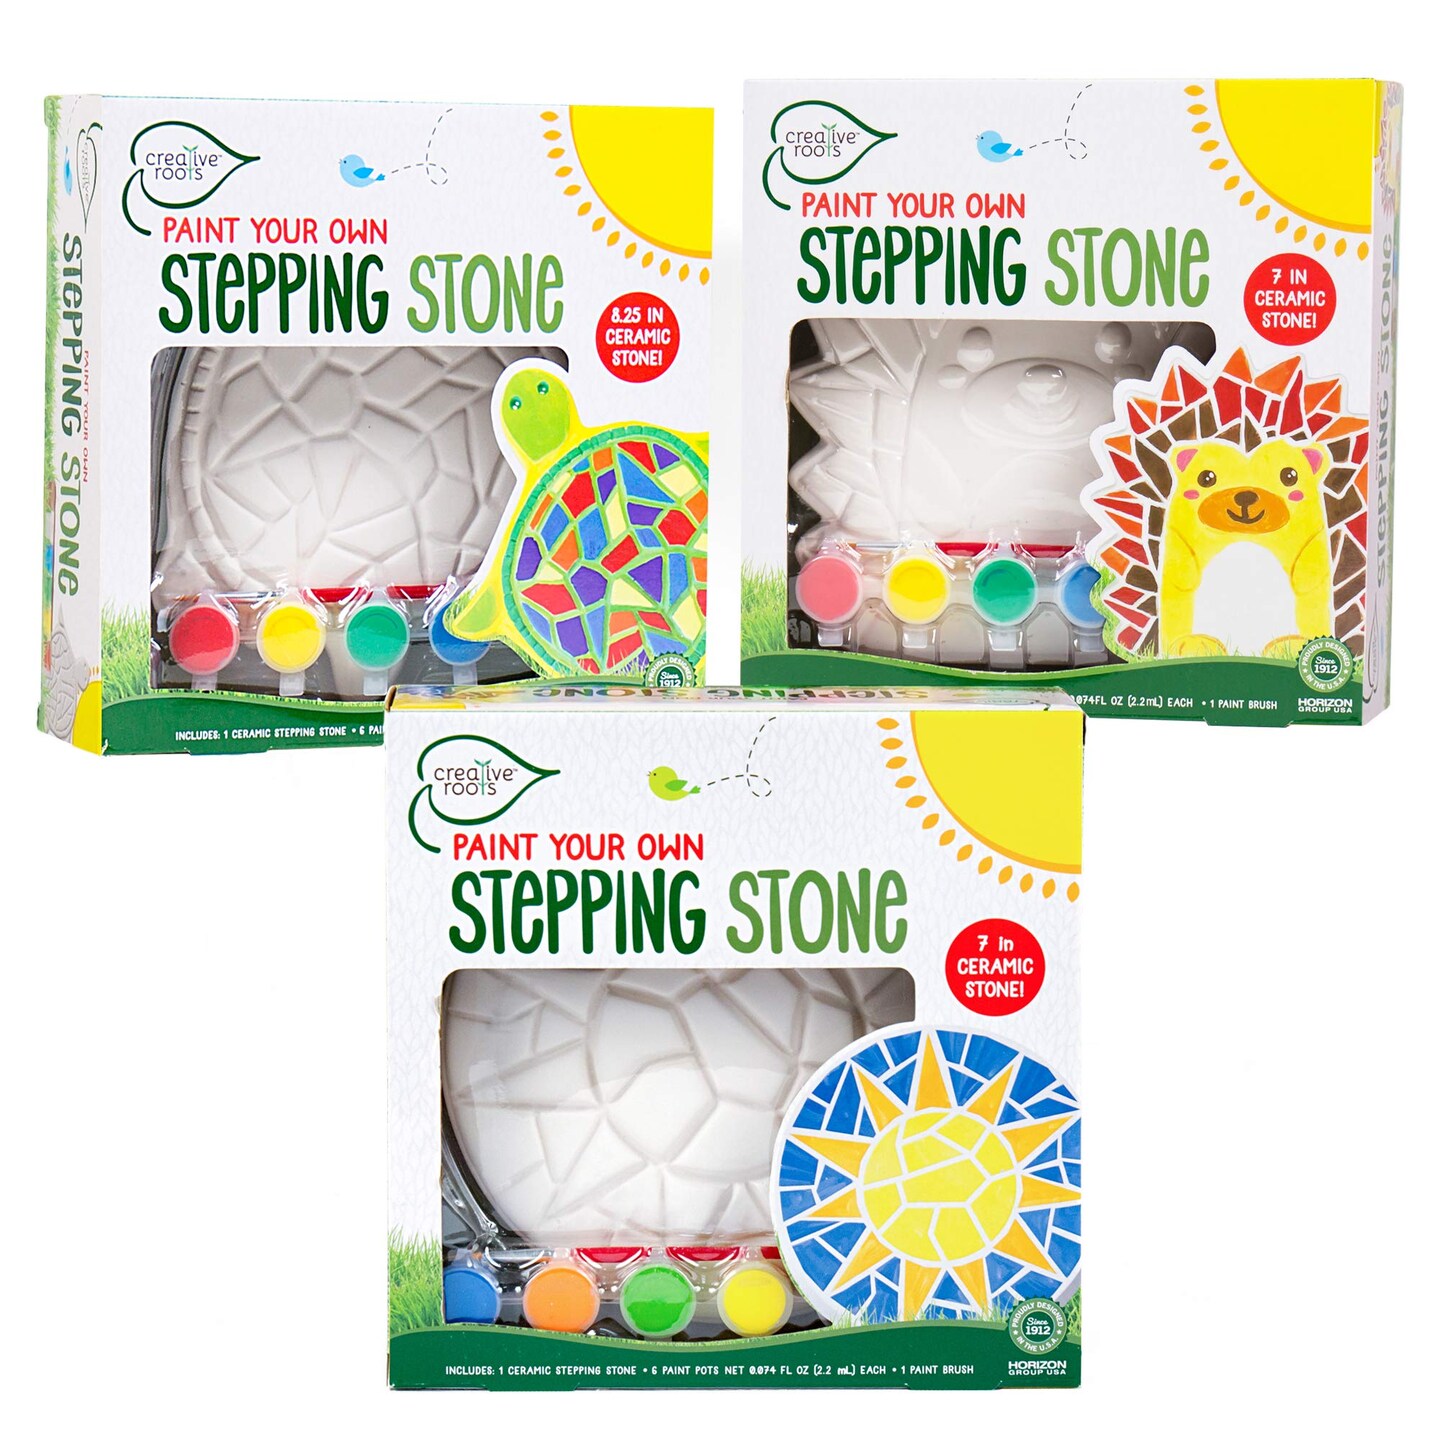 Creative Roots Mosaic Turtle, Hedgehog, &#x26; Sun Stepping Stone, Includes 3-Pack 7-Inch Ceramic Stepping Stone &#x26; 6 Vibrant Paints, Paint Your Own &#x26; DIY Stepping Stone for Kids Ages 8+